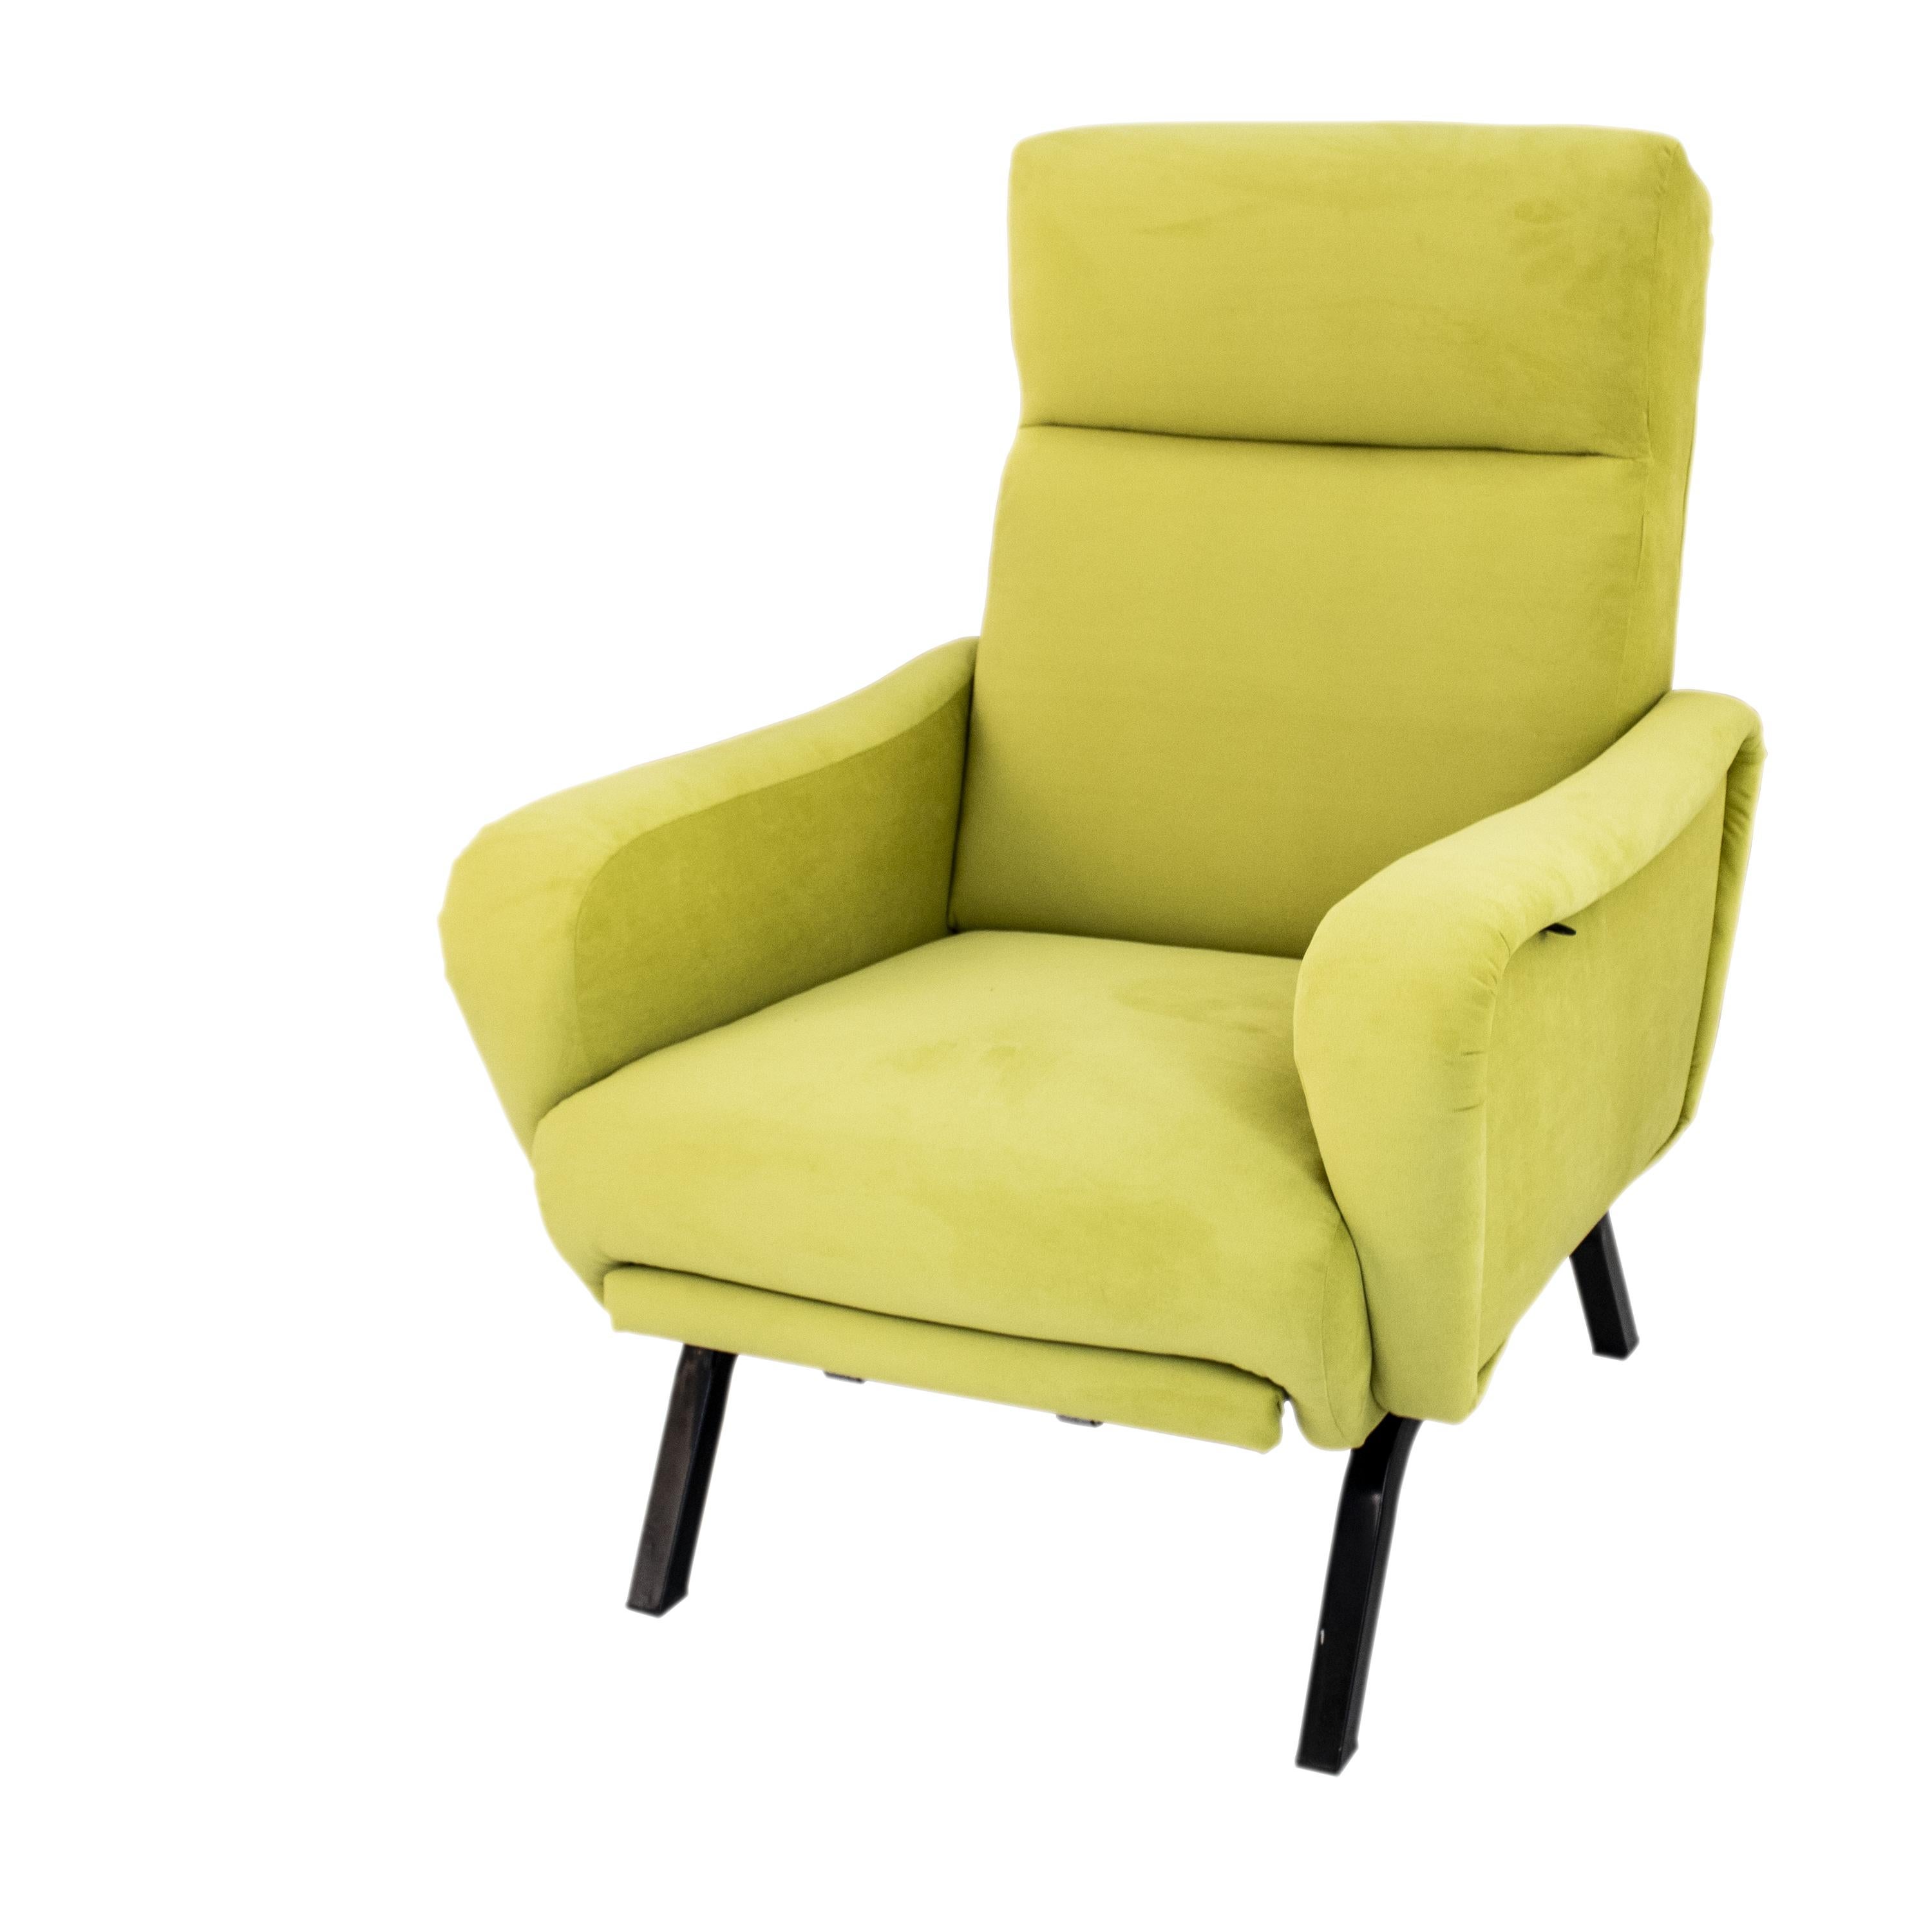 This Italian reclinable armchair is made out of a solid metal and wood structure, covered in foam, and upholstered in a bright green velvet fabric. 
It's a comfortable and versatile design that allows the seat to recline and gives the user a more